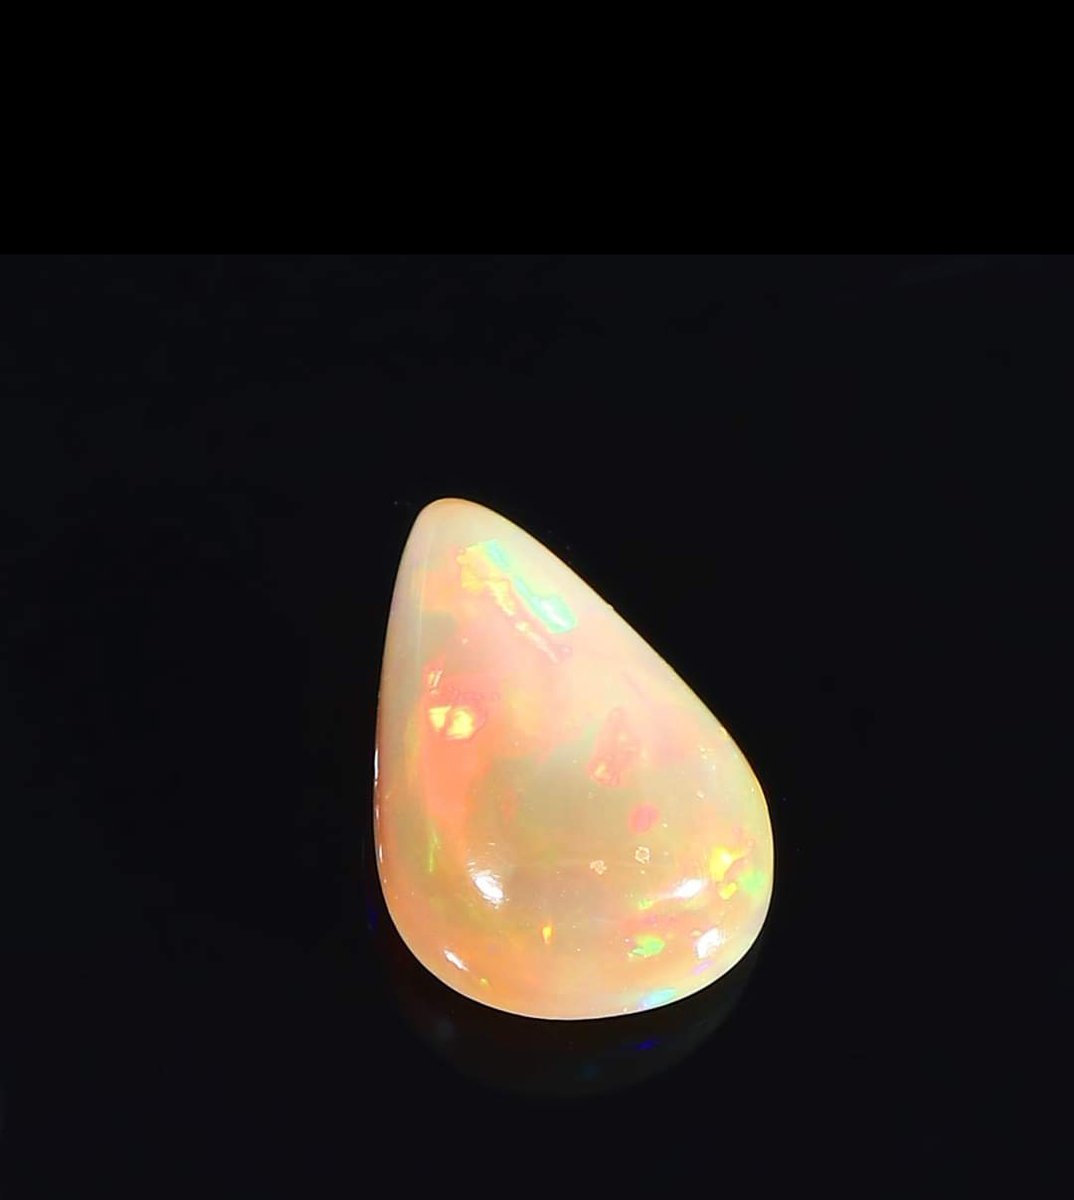 Excited to share the latest addition to my #etsy shop: AAA+++ Top Quality Natural Ethiopian Opal Cabochon, Opal Making Jewelry AL#439 etsy.me/3u1G5bL #orange #birthday #diwali #lovefriendship #no #gemstone #white #opal #opalring